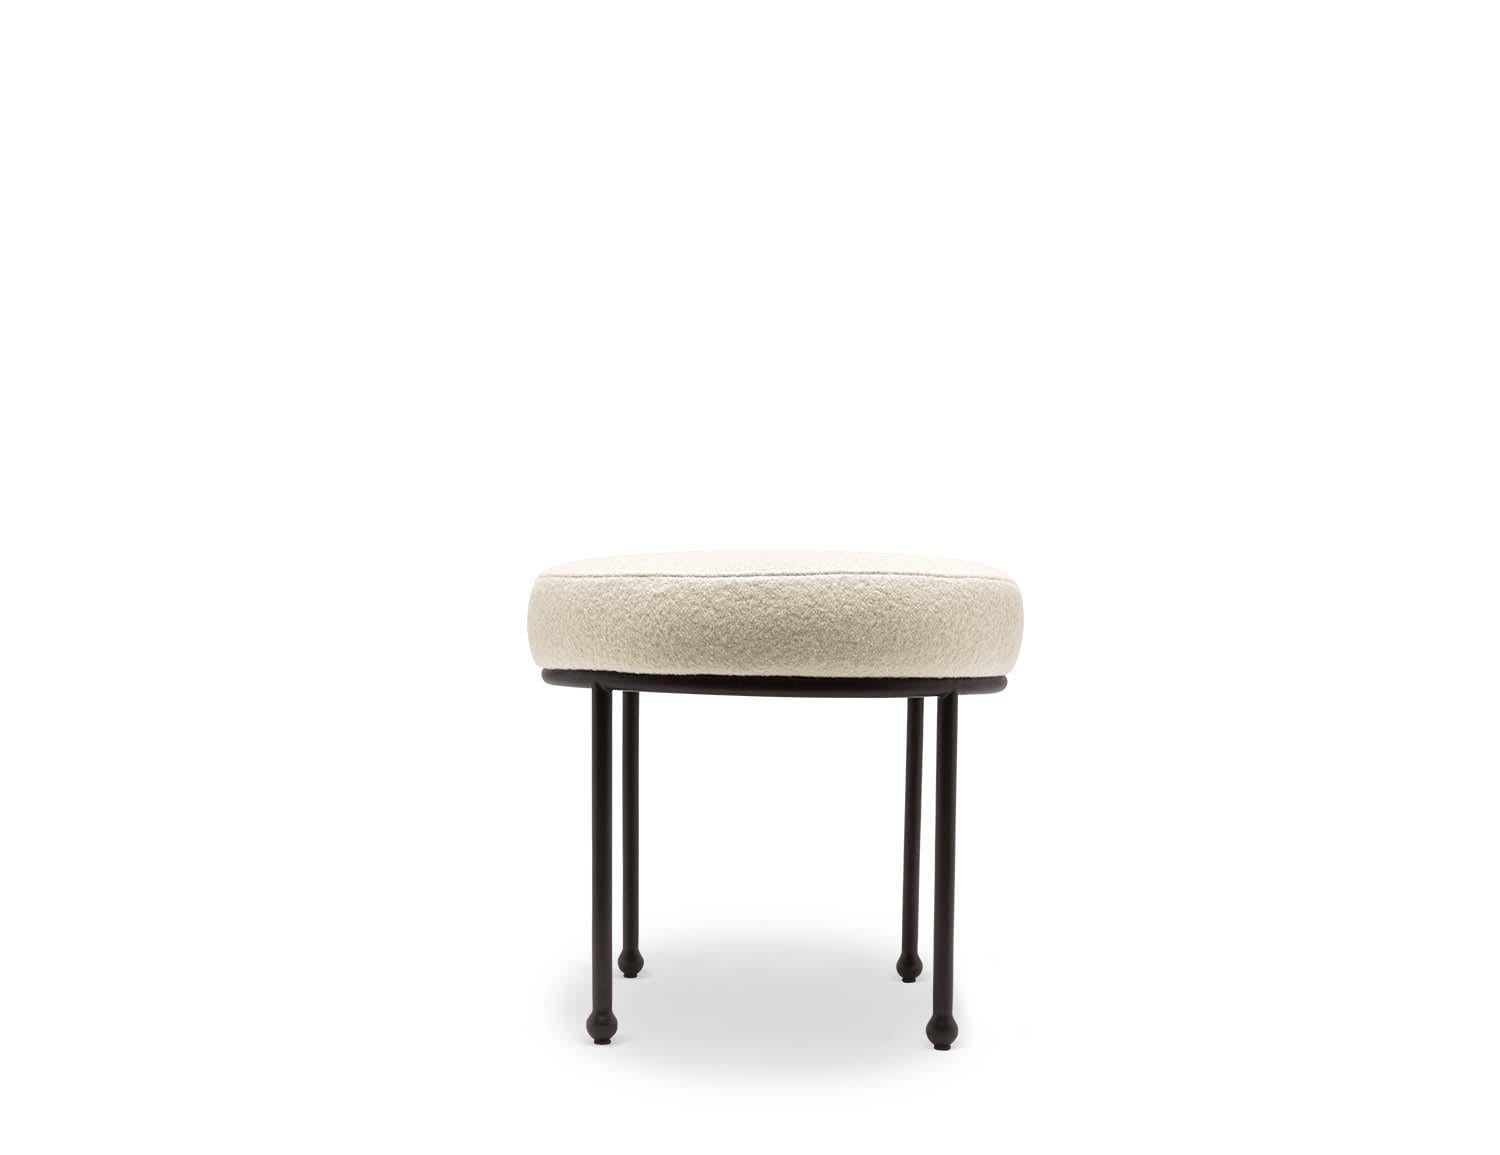 The Petite Orsini Ottoman features a minimal metal base with decorative ball feet and an upholstered seat. Shown here in Matte Black. 

The Lawson-Fenning Collection is designed and handmade in Los Angeles, California.

Message us to find out which